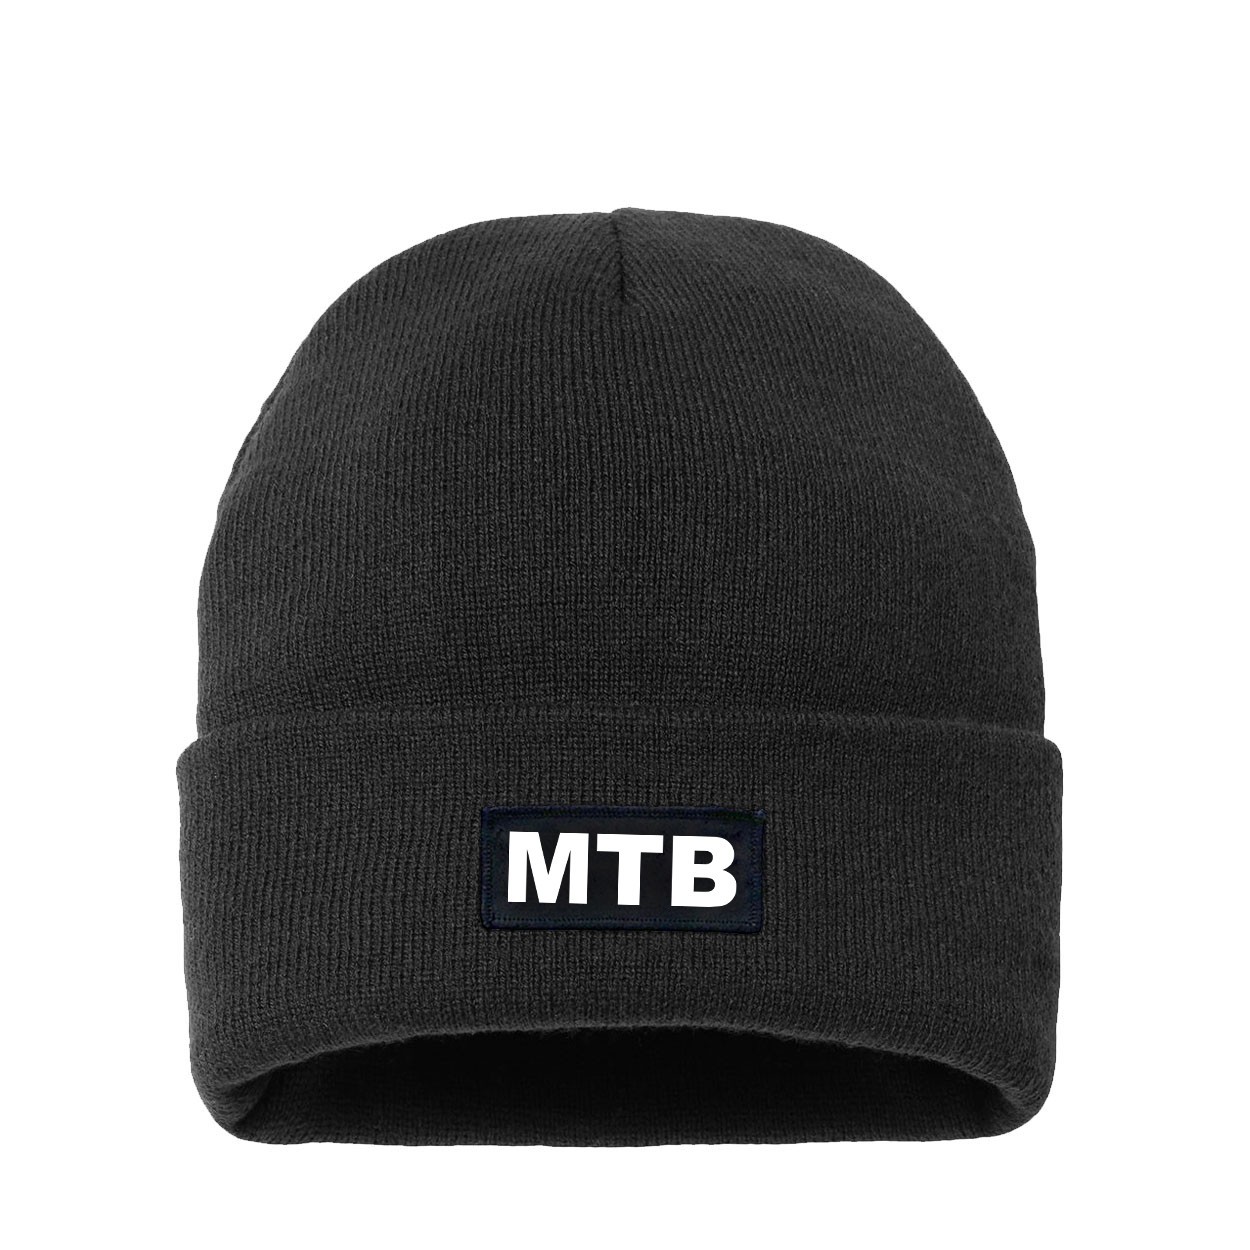 Mtb Brand Logo Night Out Woven Patch Night Out Sherpa Lined Cuffed Beanie Black